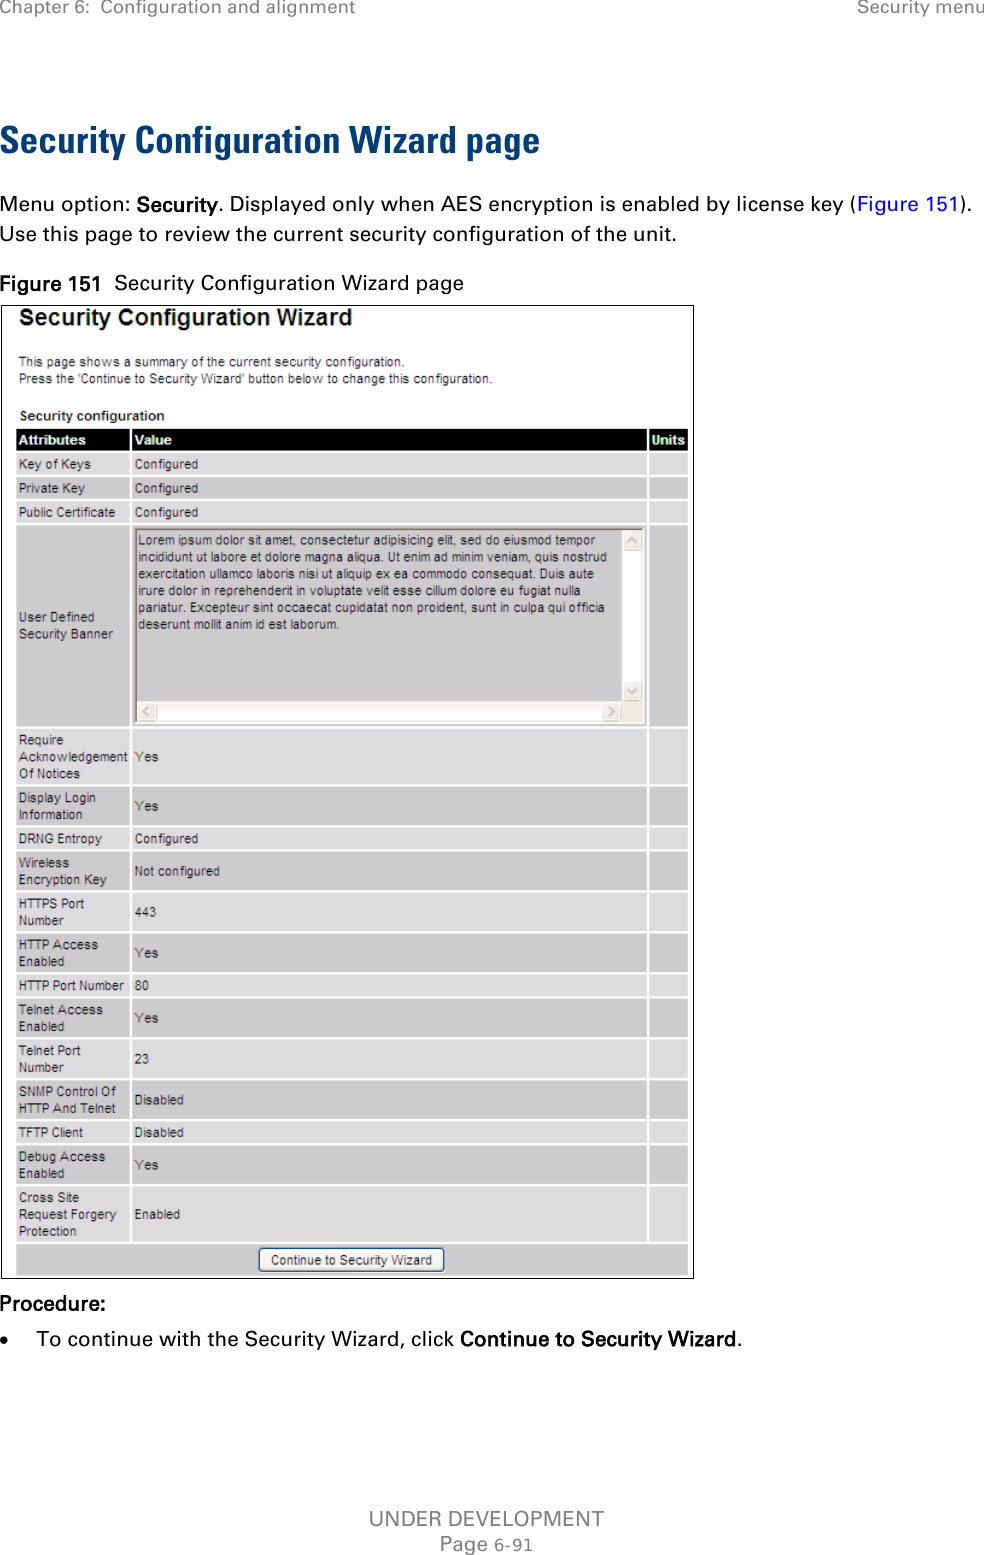 Chapter 6:  Configuration and alignment Security menu  Security Configuration Wizard page Menu option: Security. Displayed only when AES encryption is enabled by license key (Figure 151). Use this page to review the current security configuration of the unit. Figure 151  Security Configuration Wizard page  Procedure: • To continue with the Security Wizard, click Continue to Security Wizard.  UNDER DEVELOPMENT Page 6-91 